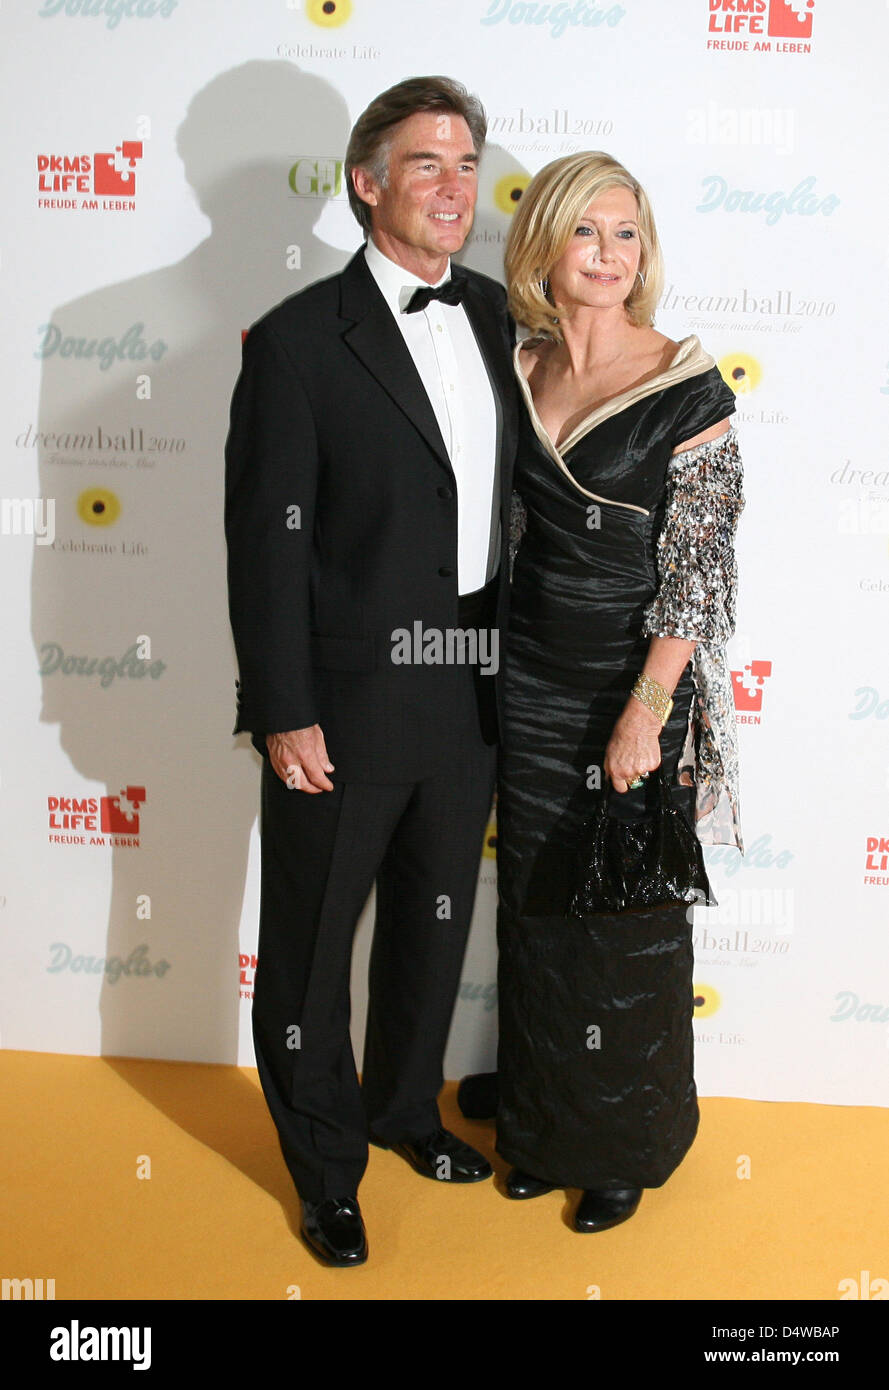 Singer Olivia Newton-John (R) and her husband John Easterling (L) arrive for the Dreamball 2010 charity event in Berlin, Germany, 23 September 2010. German bonemarrow donour centre DKMS invited guests from society. media and economy under the motto 'Celebrate Life'. Photo: Florian Schuh Stock Photo